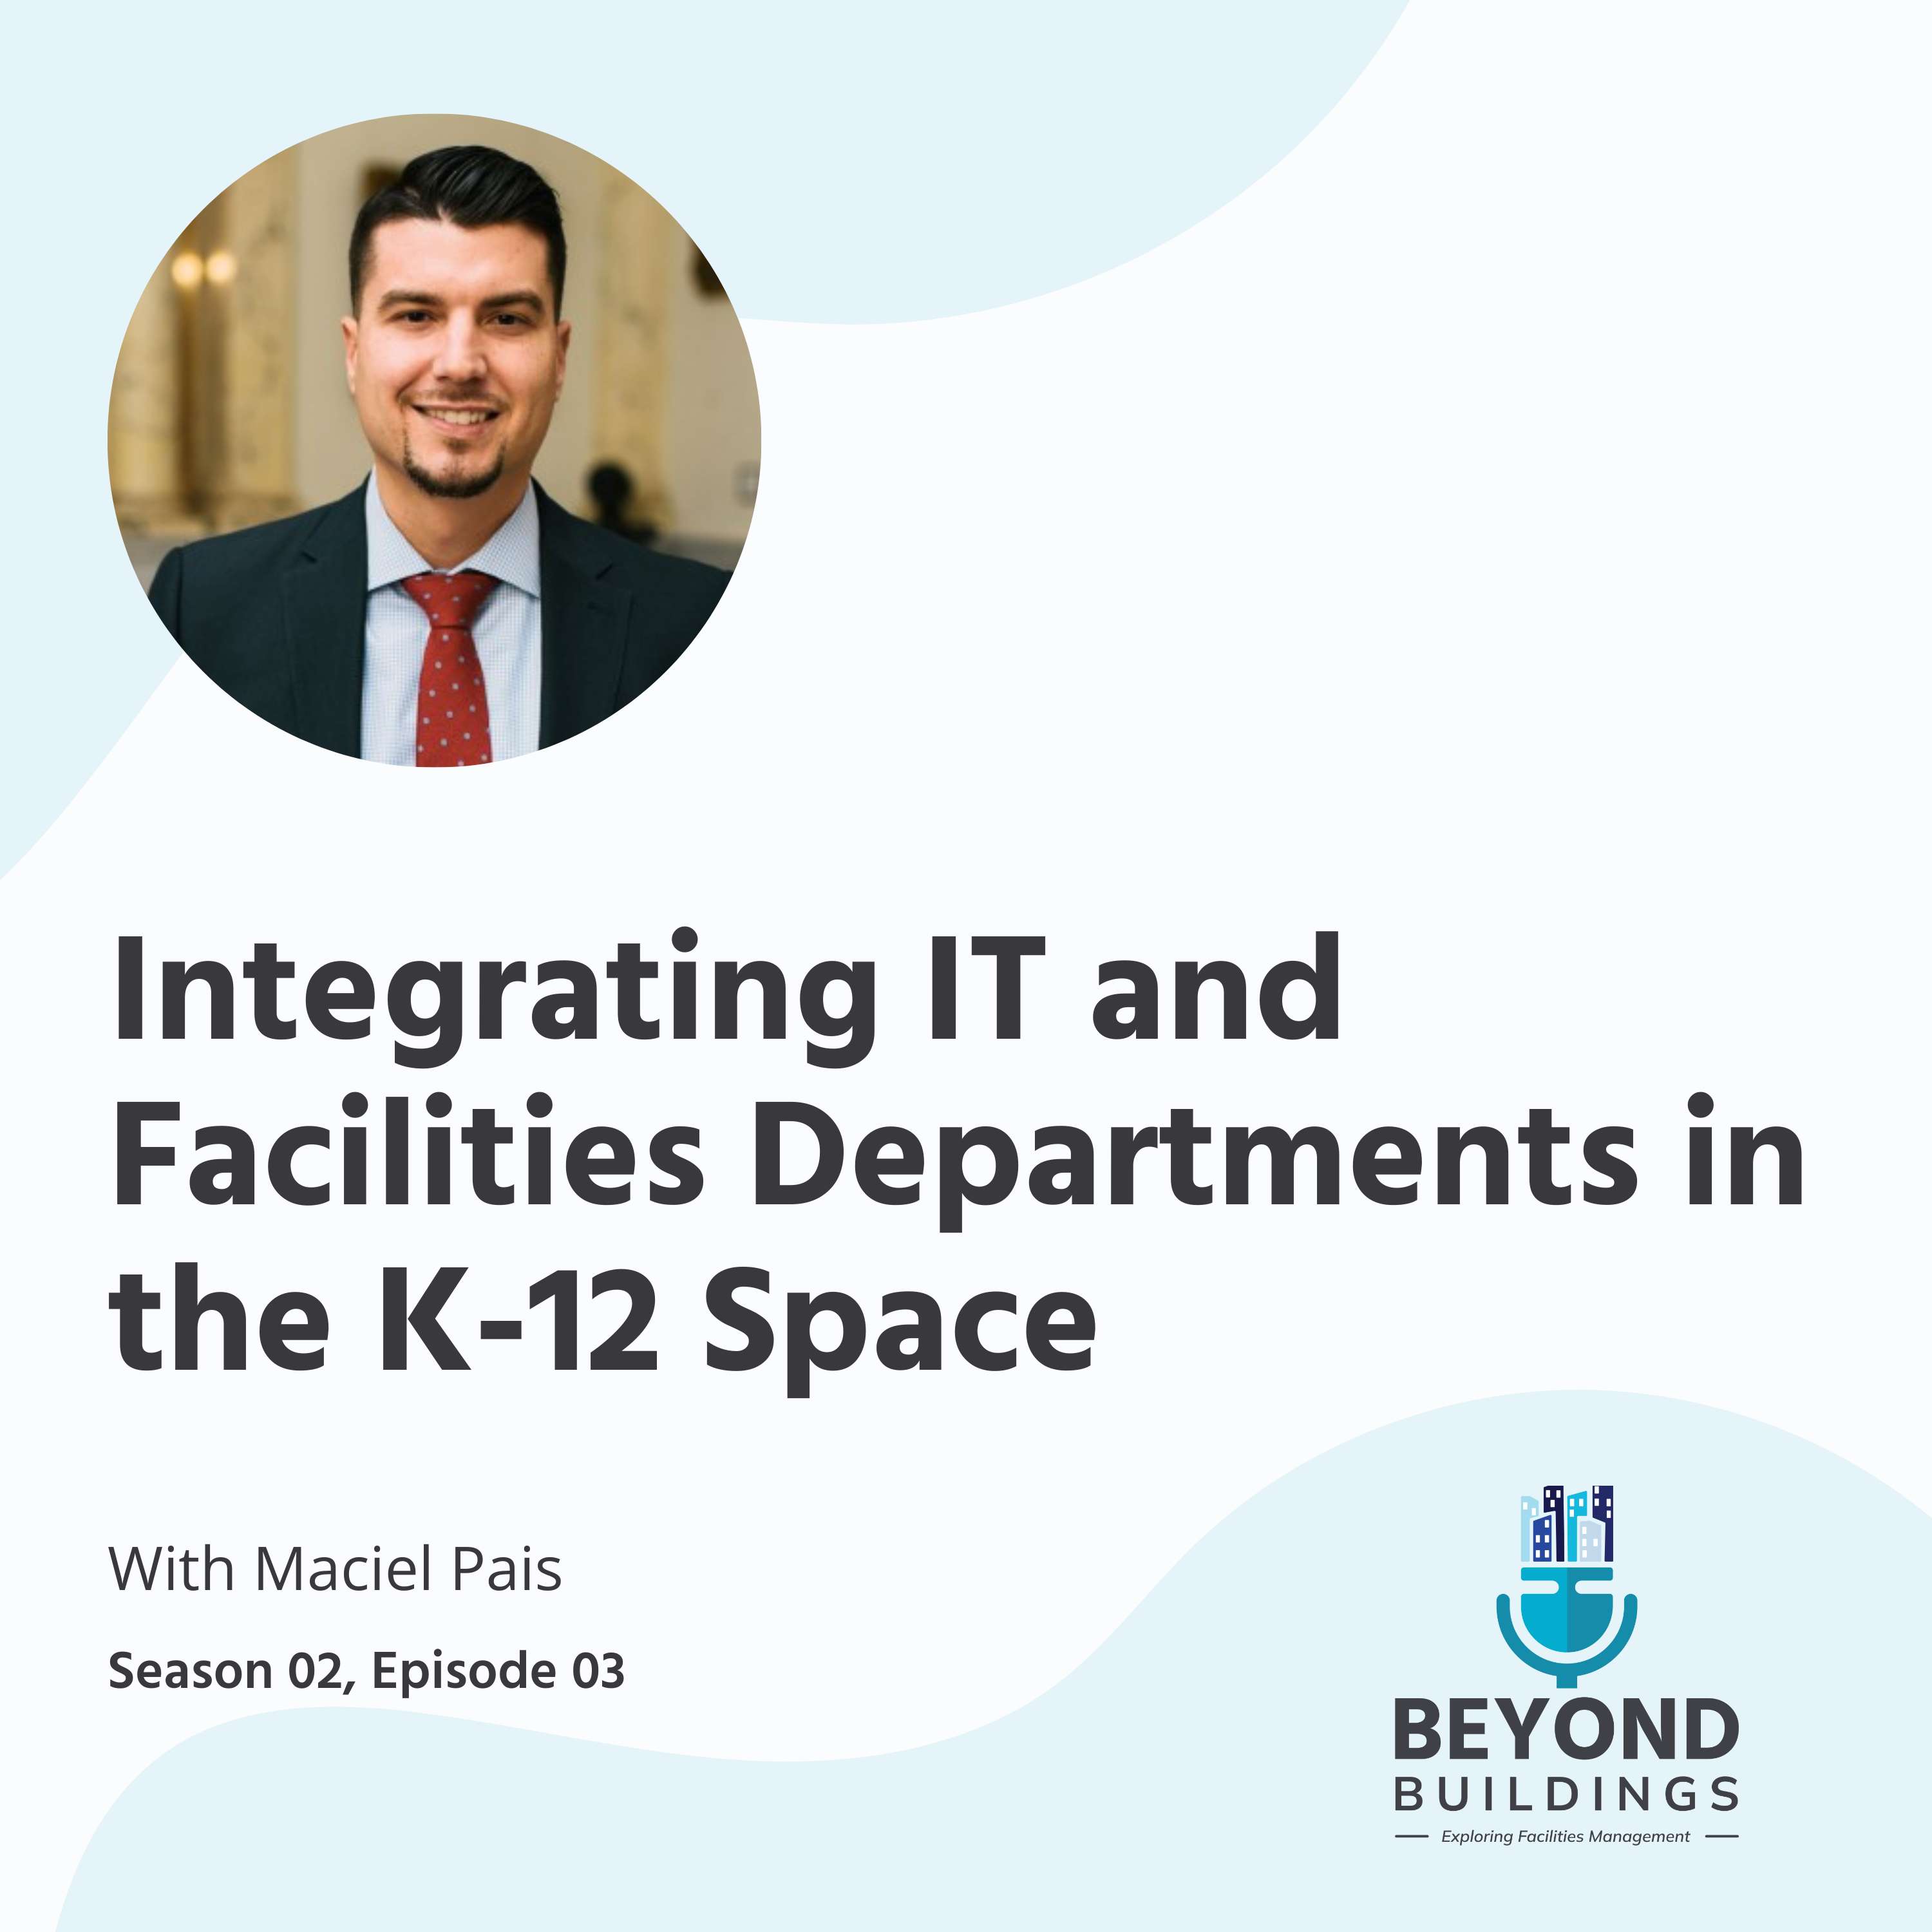 Integrating IT and Facilities Departments in the K-12 Space